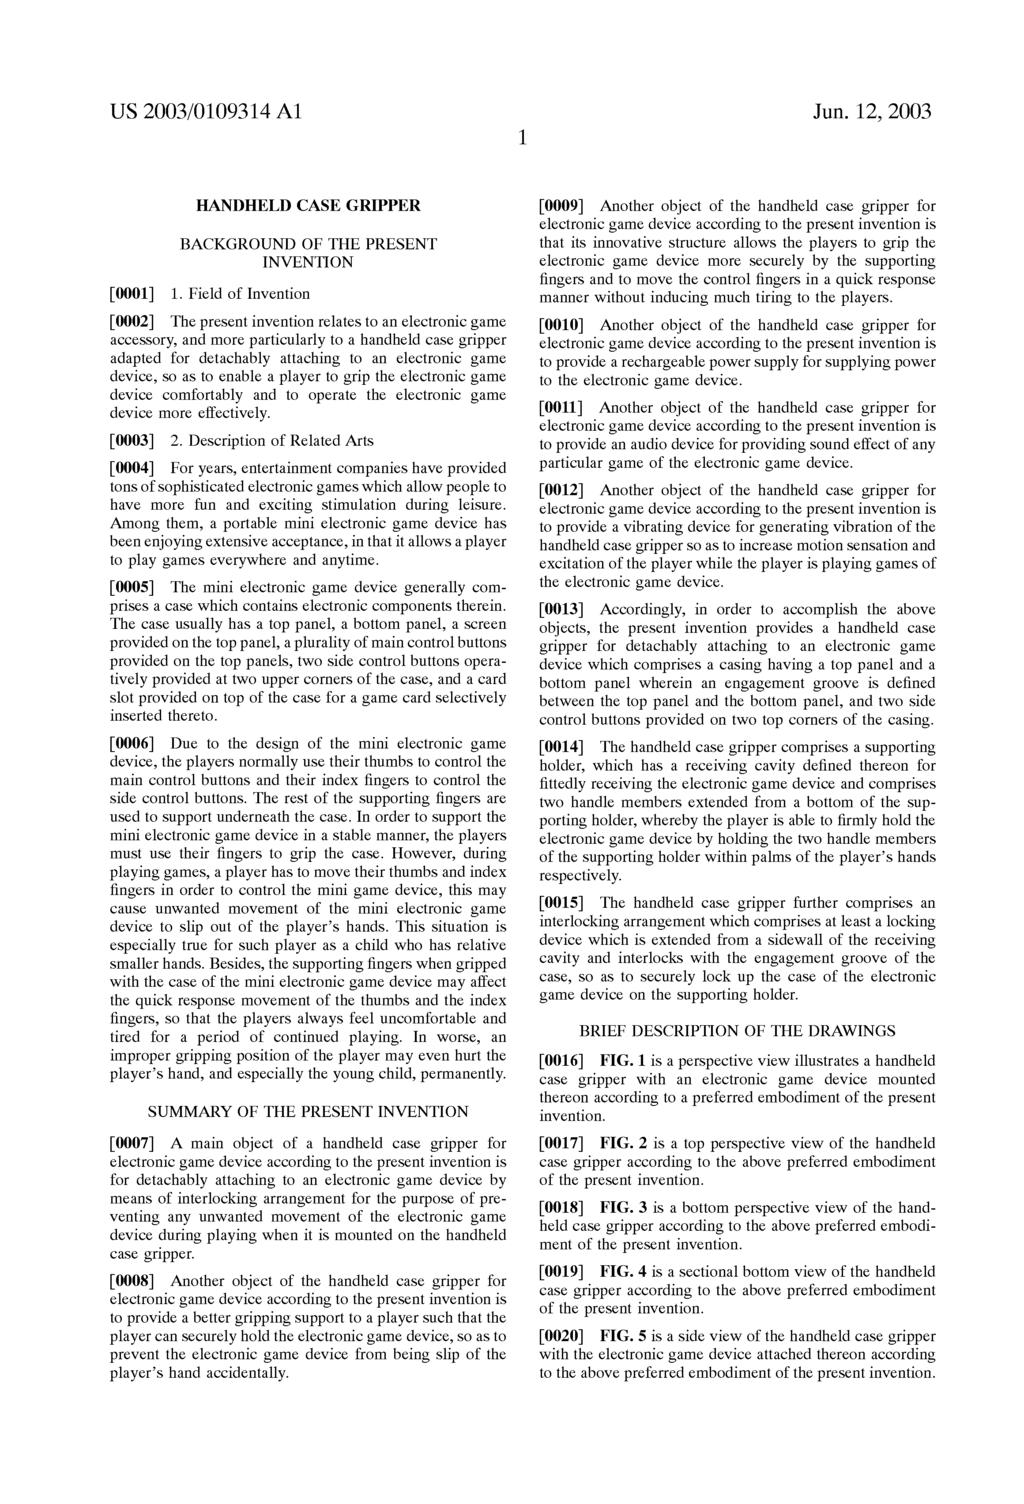 US 2003/0109314 A1 Jun. 12, 2003 HANDHELD CASE GRIPPER BACKGROUND OF THE PRESENT INVENTION 0001) 1.